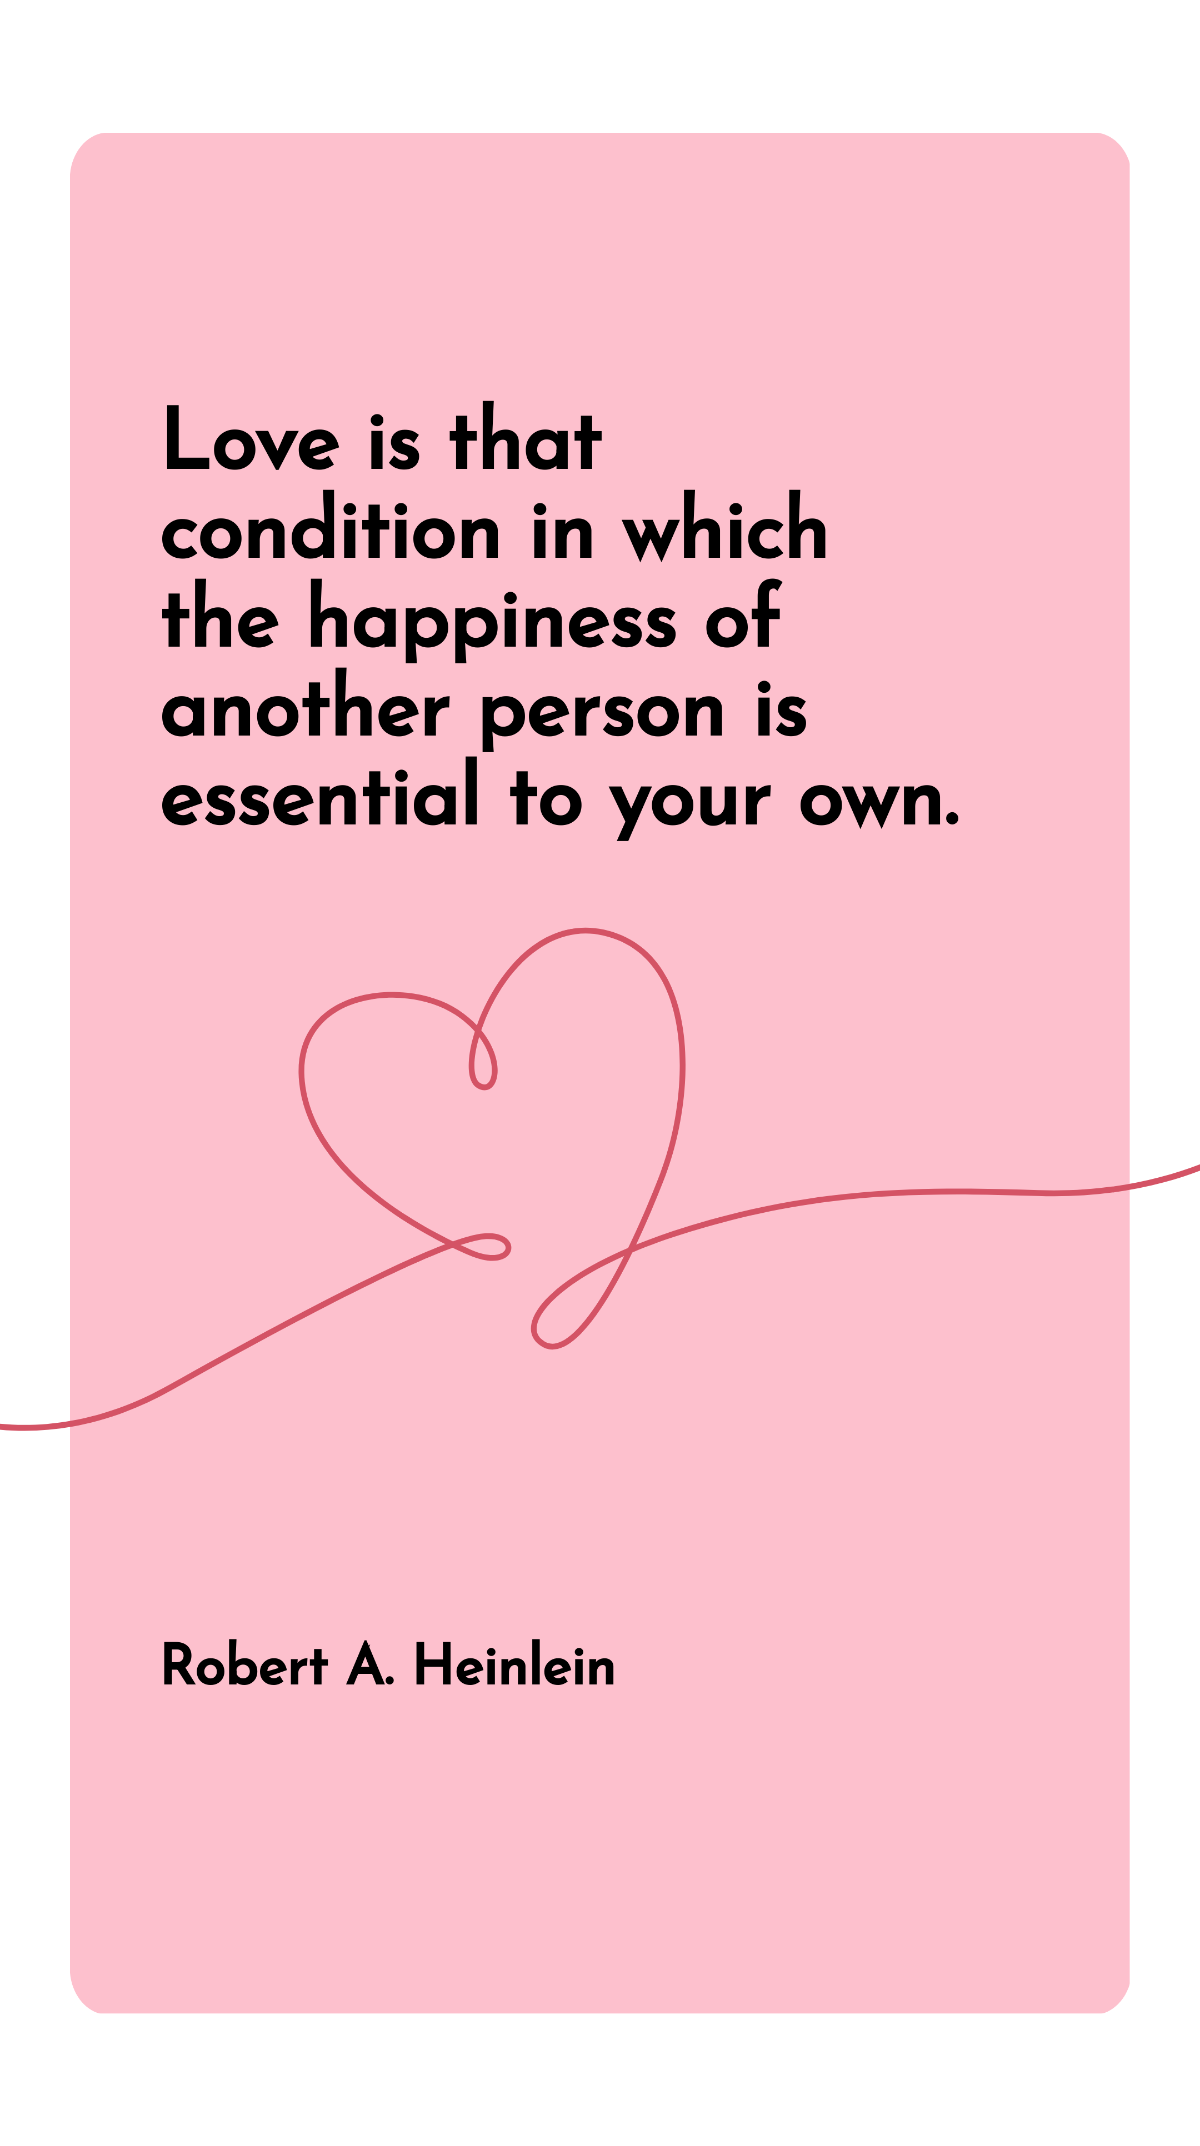 Robert A. Heinlein - “Love is that condition in which the happiness of another person is essential to your own.”